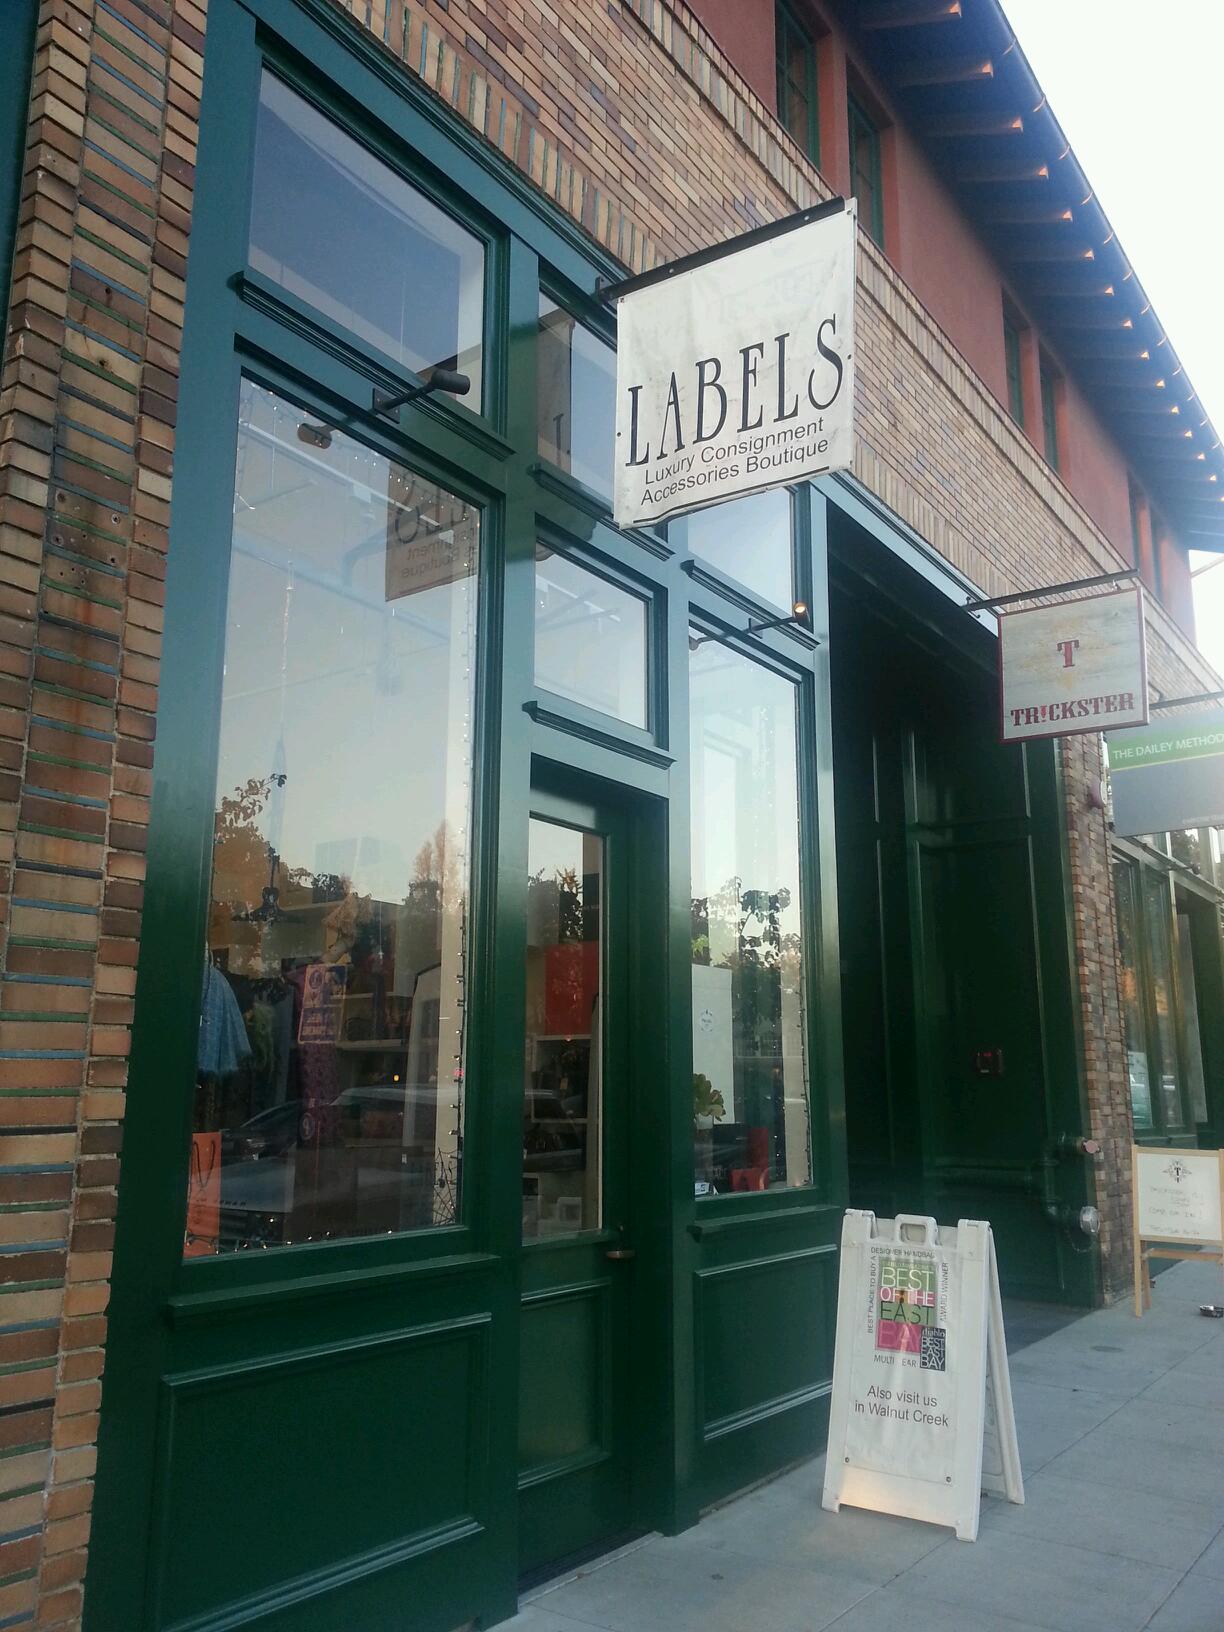 Labels Luxury Consignment